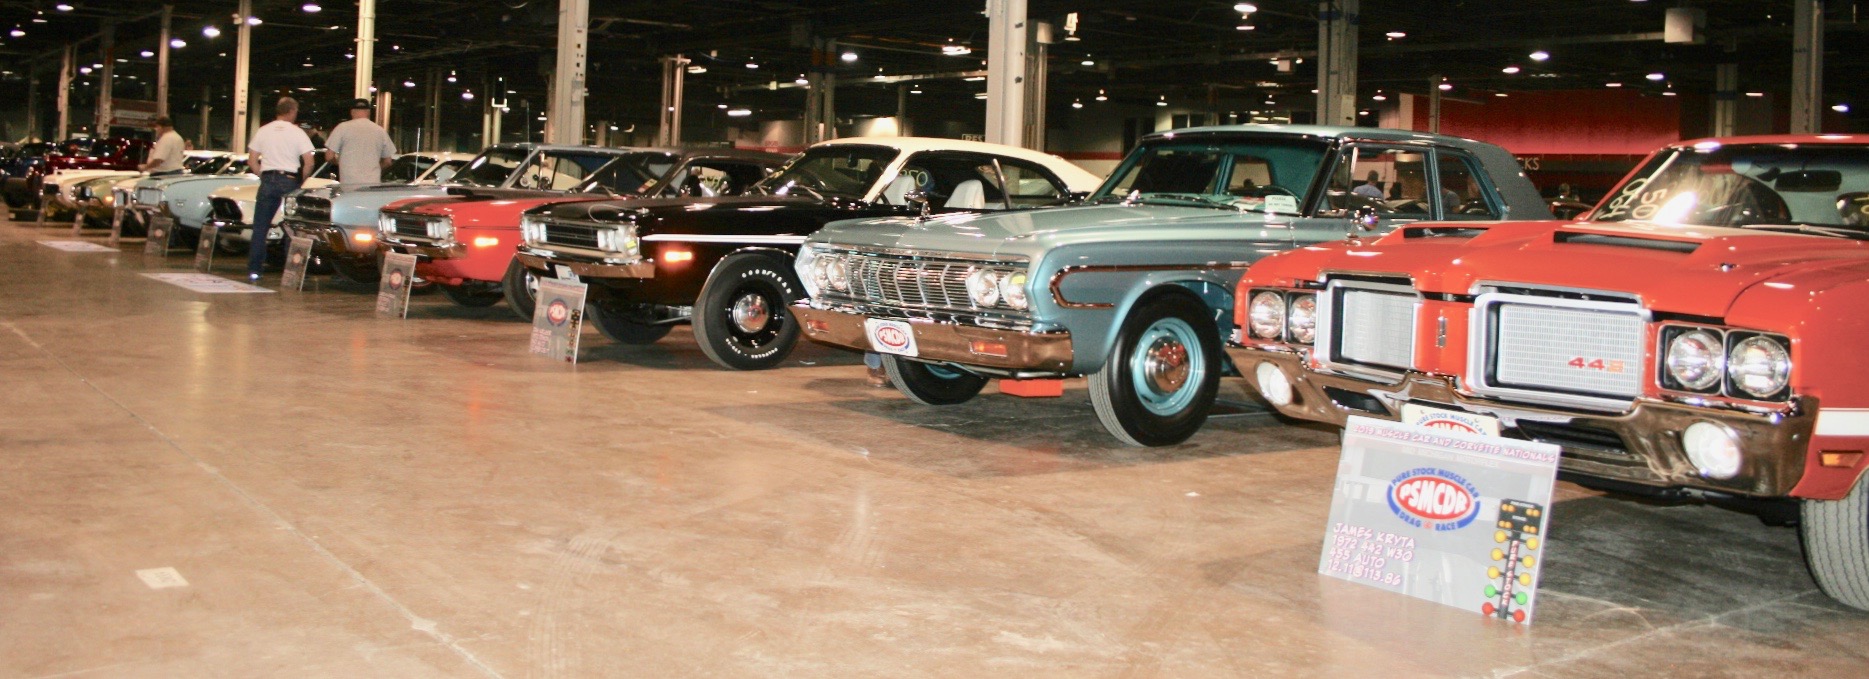 Muscle Car Nationals, Perfection is easy to find at Muscle Car and Corvette Nationals, ClassicCars.com Journal